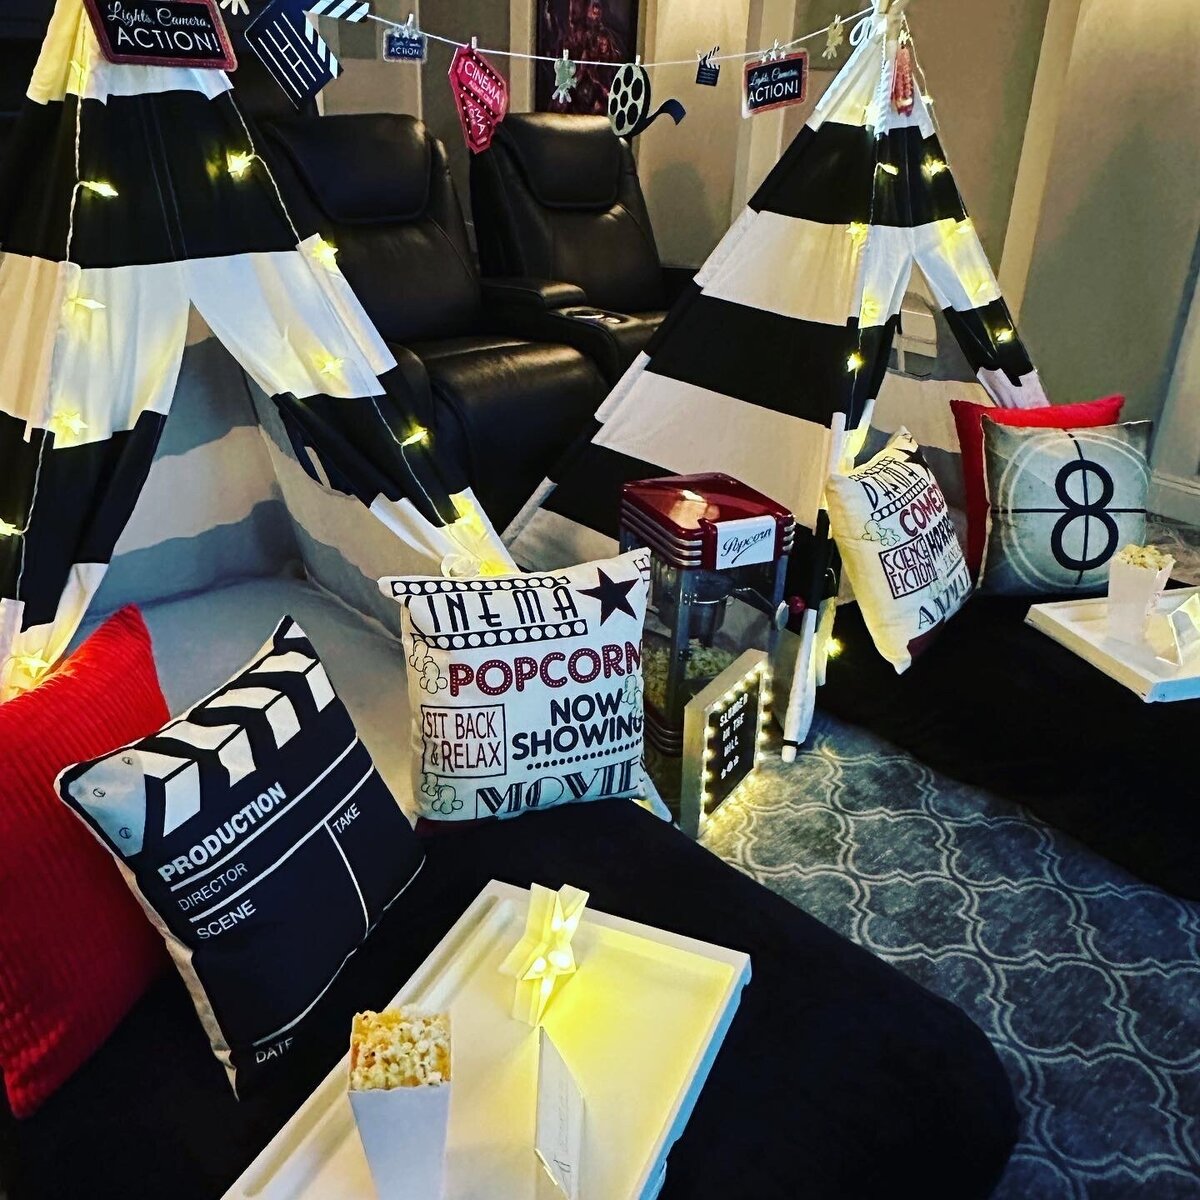 teepee beds with movie theater props